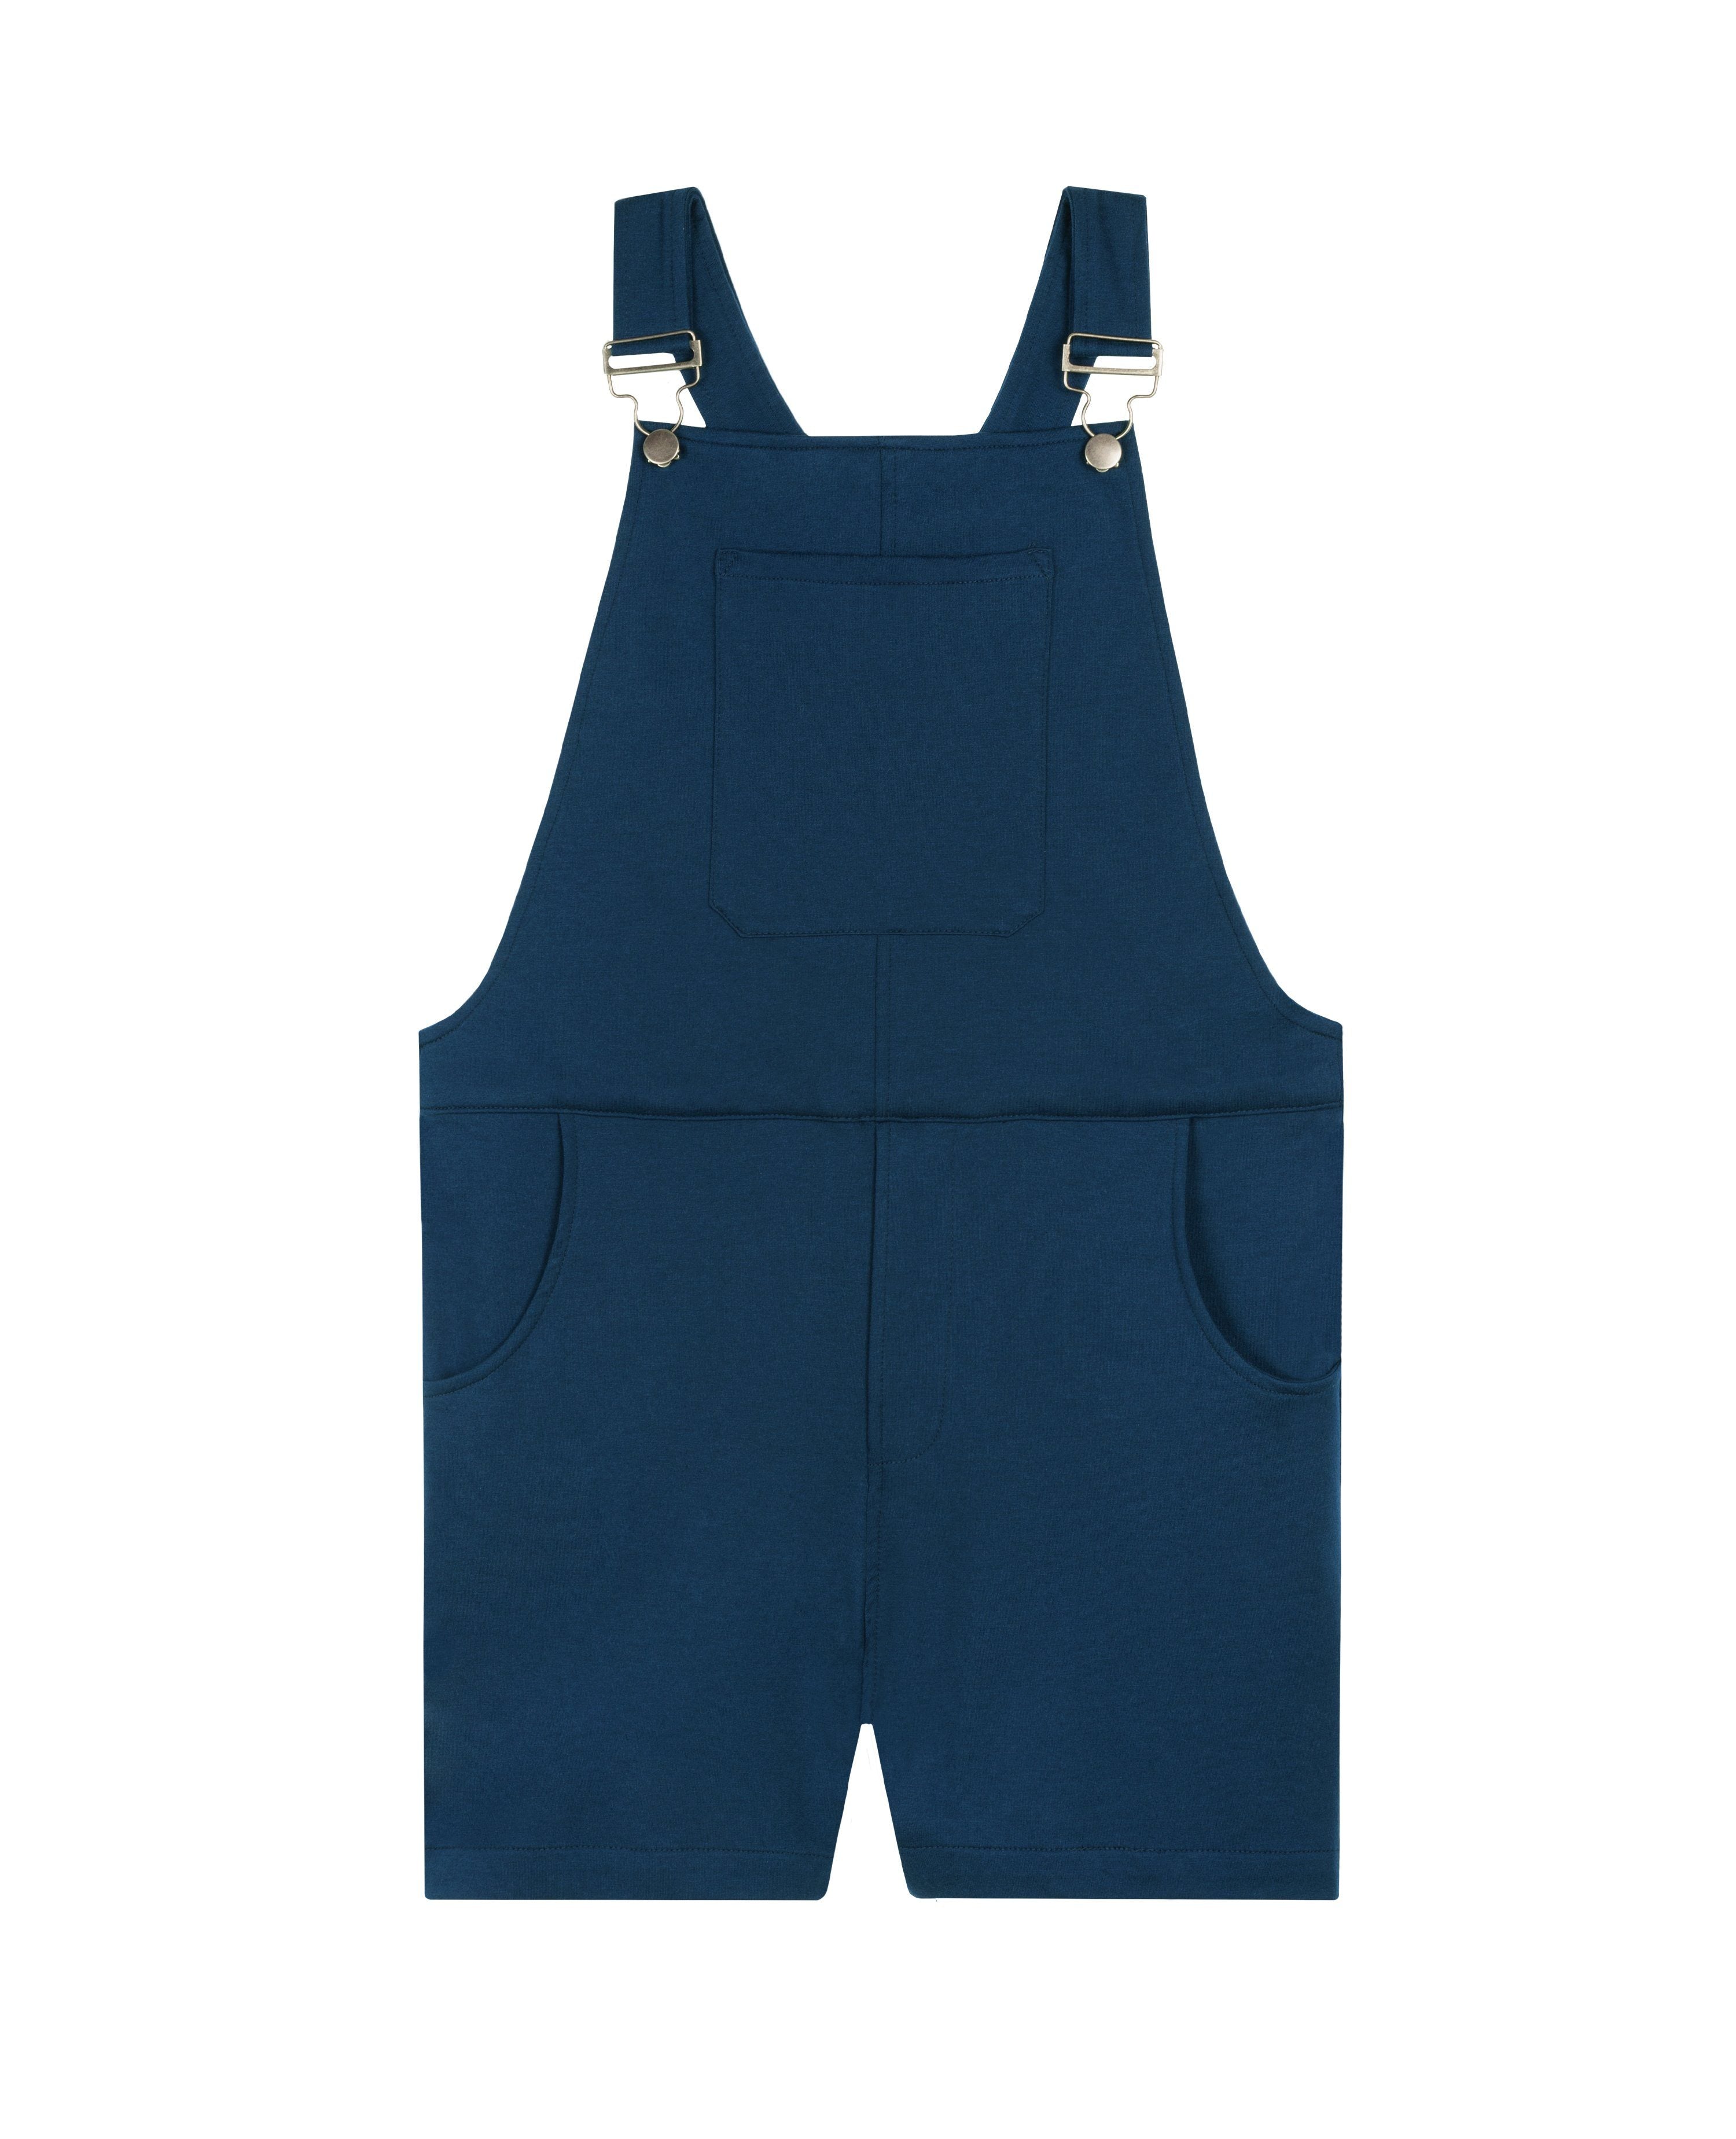 Swovie Shorts - Navy Sweatpant Overalls The Great Fantastic